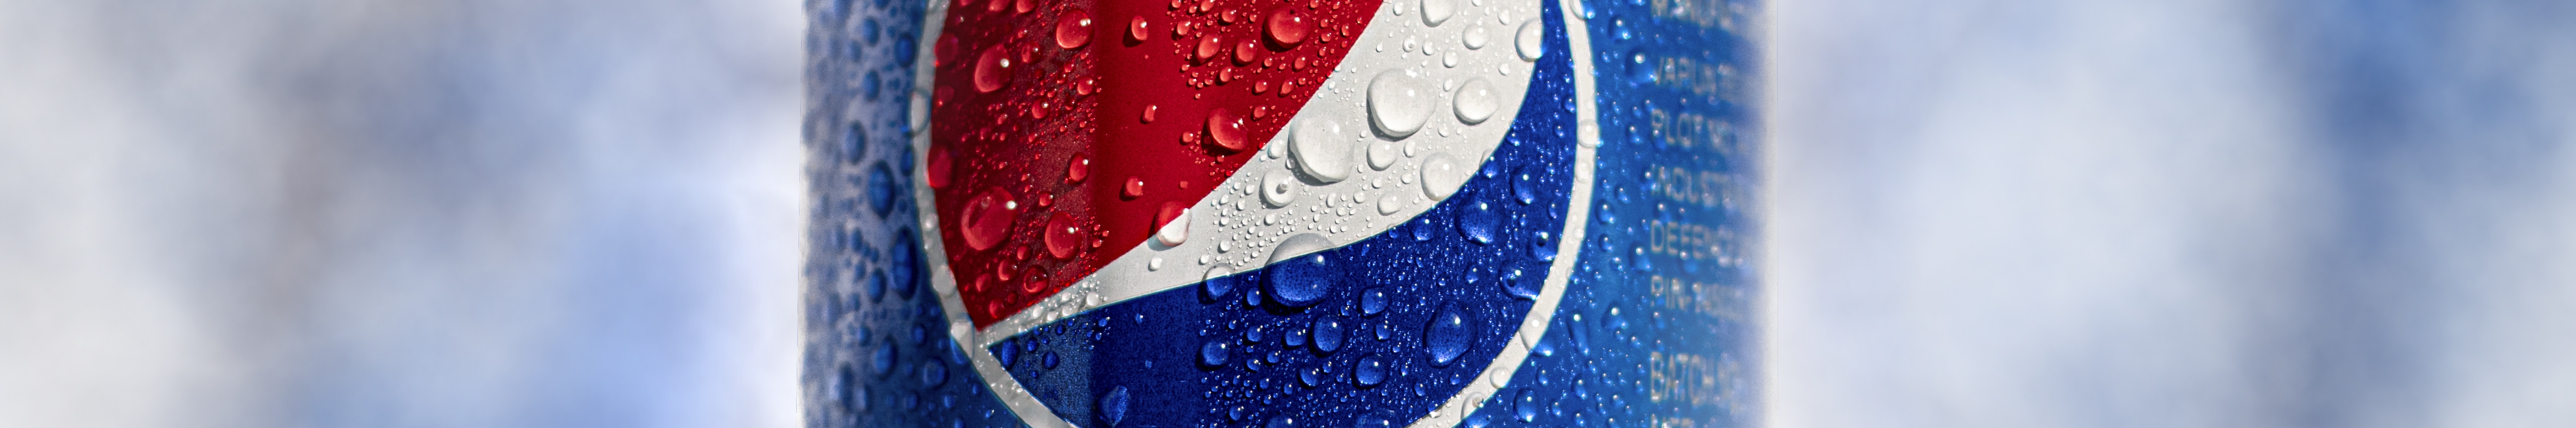 Pepsico derives only 26% of its sales from healthy products , relying mostly on sugar rich drinks